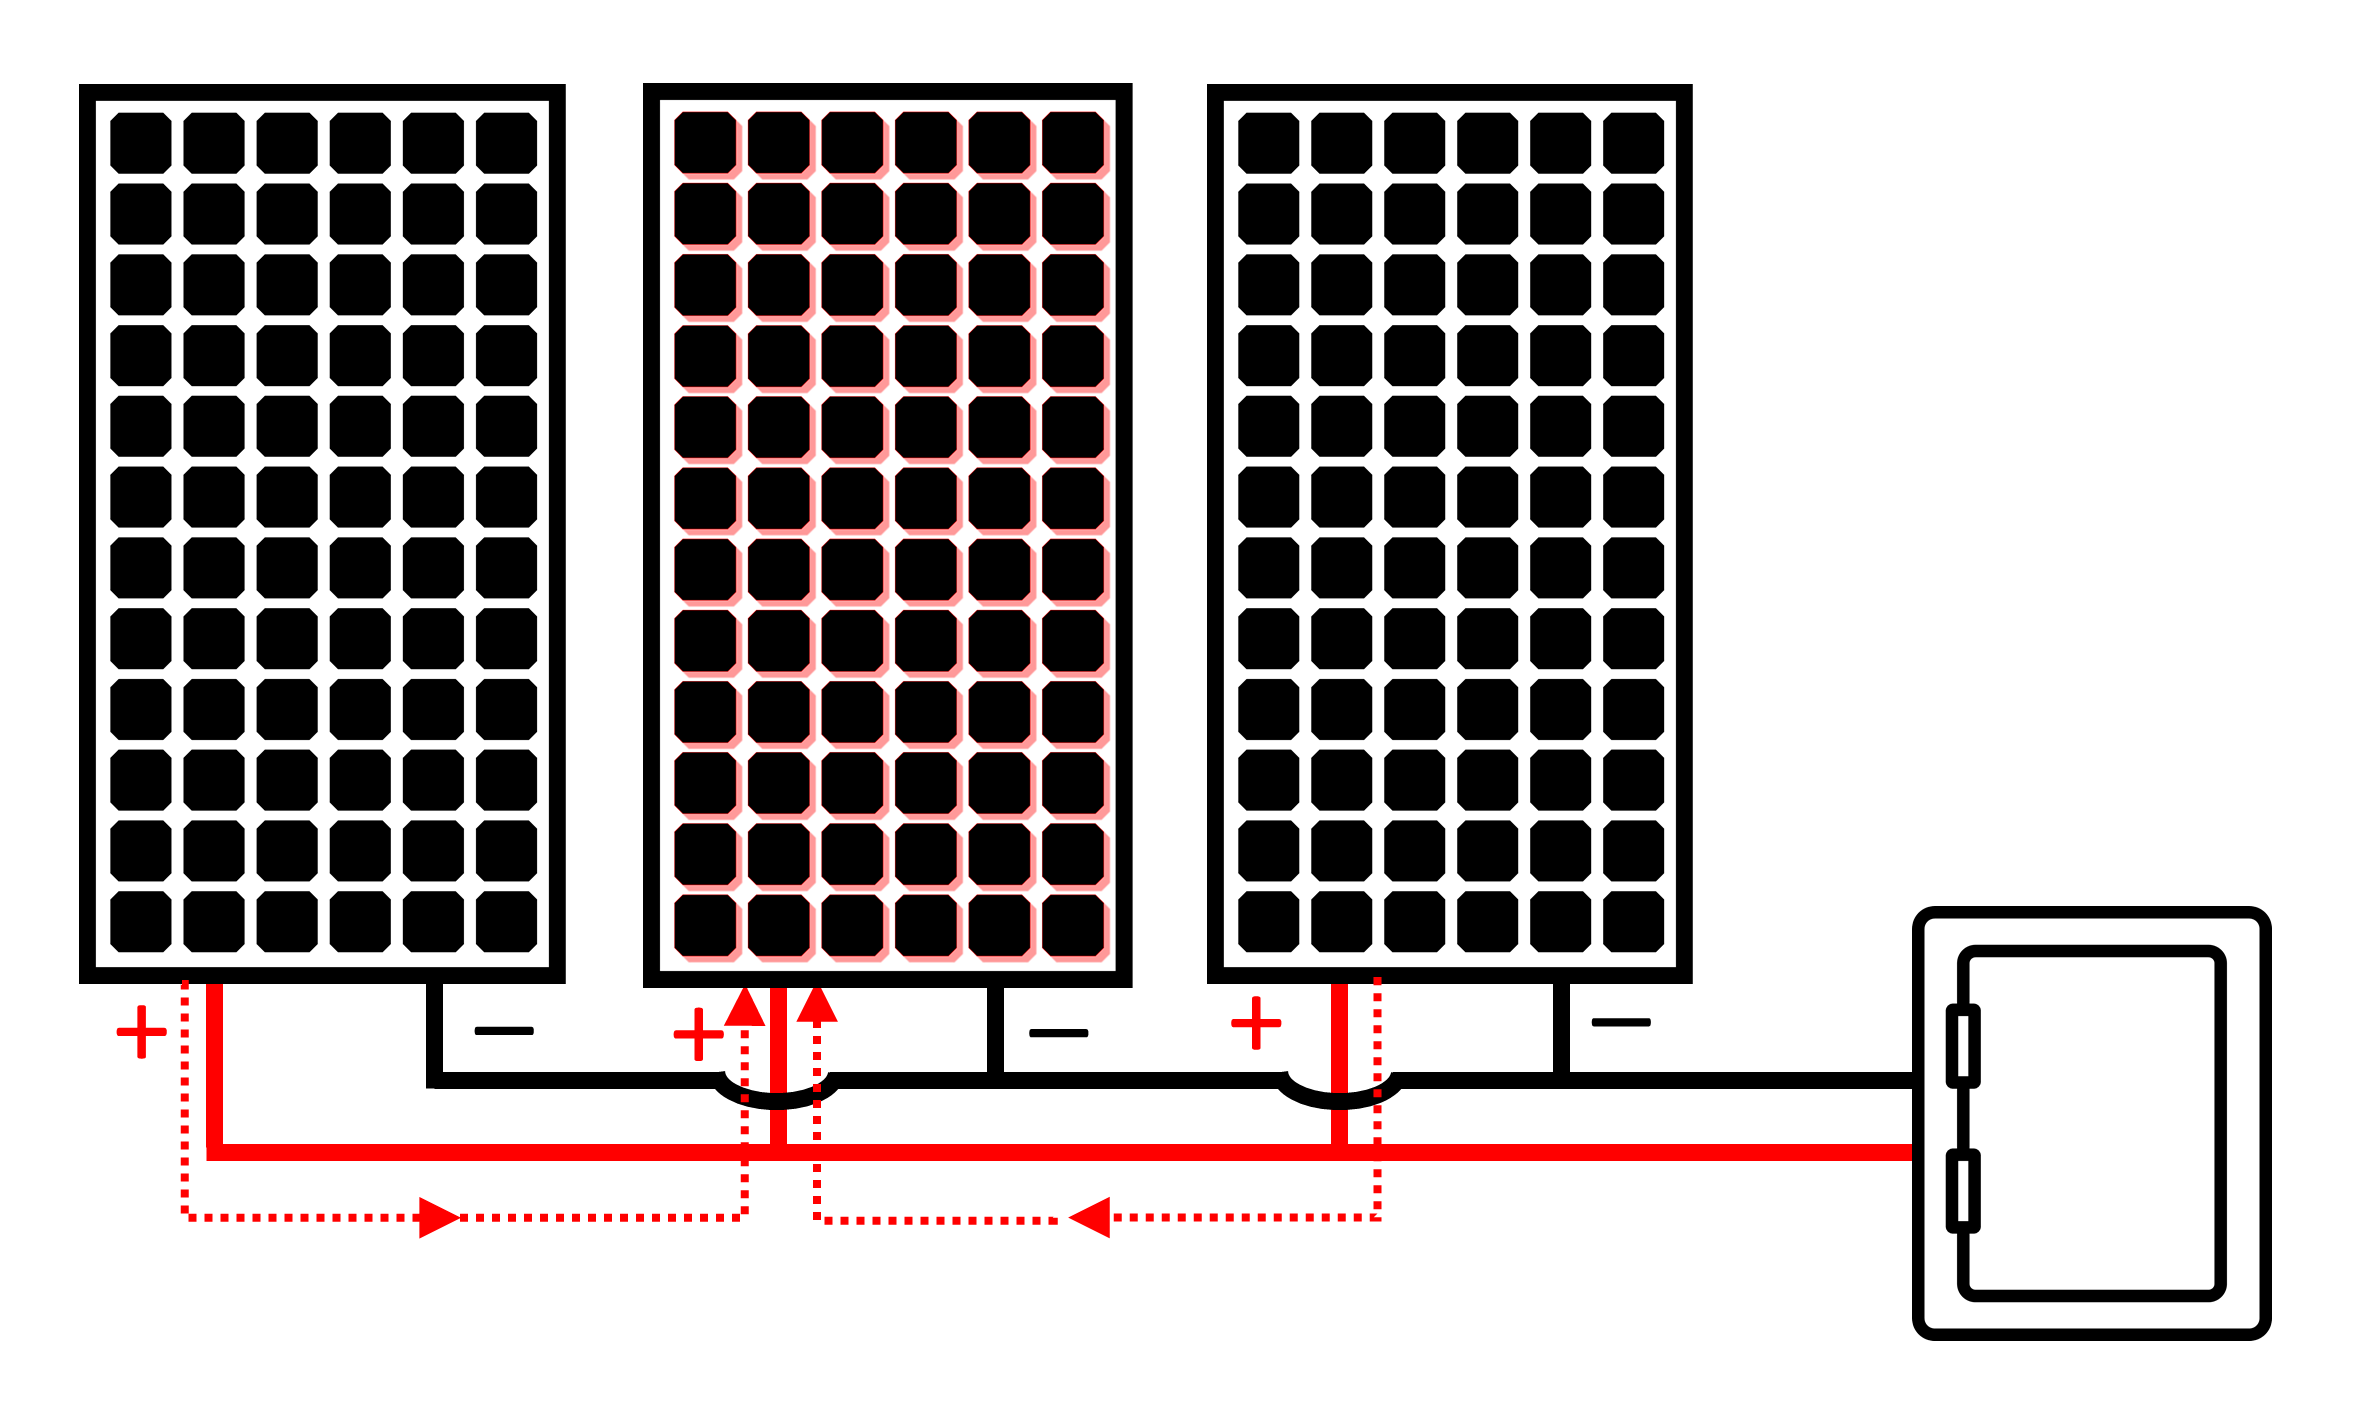 Three PV modules connected in parallel with dashed lines indicating potential backfeed into the faulty PV module in the center.